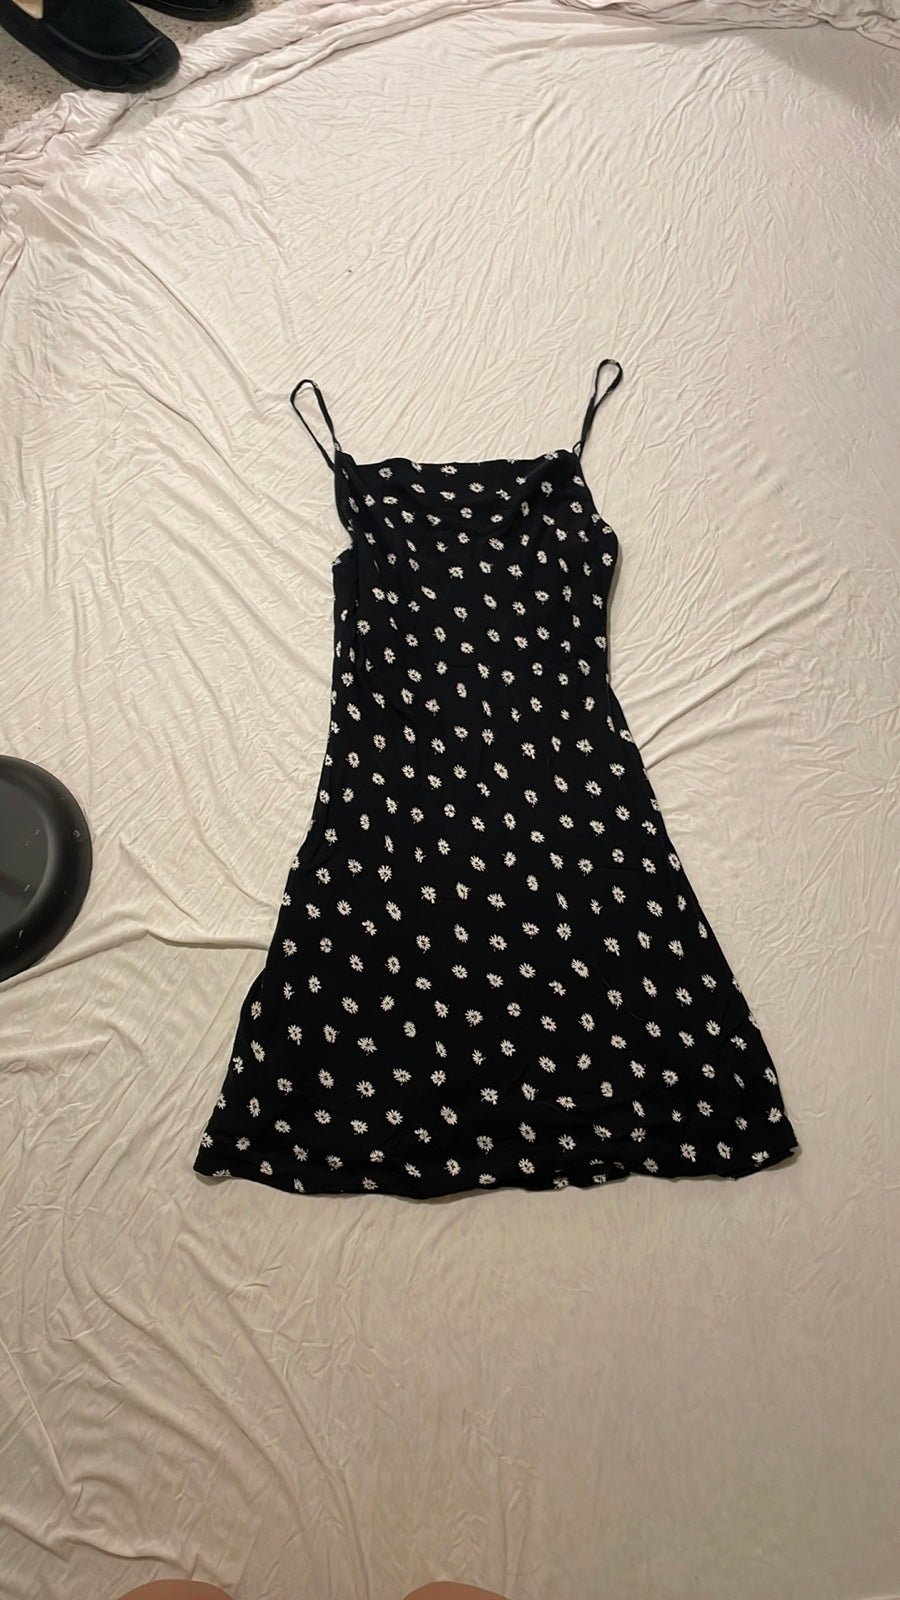 Elegant Abercrombie and Fitch dress iRWuPh1Dr best sale